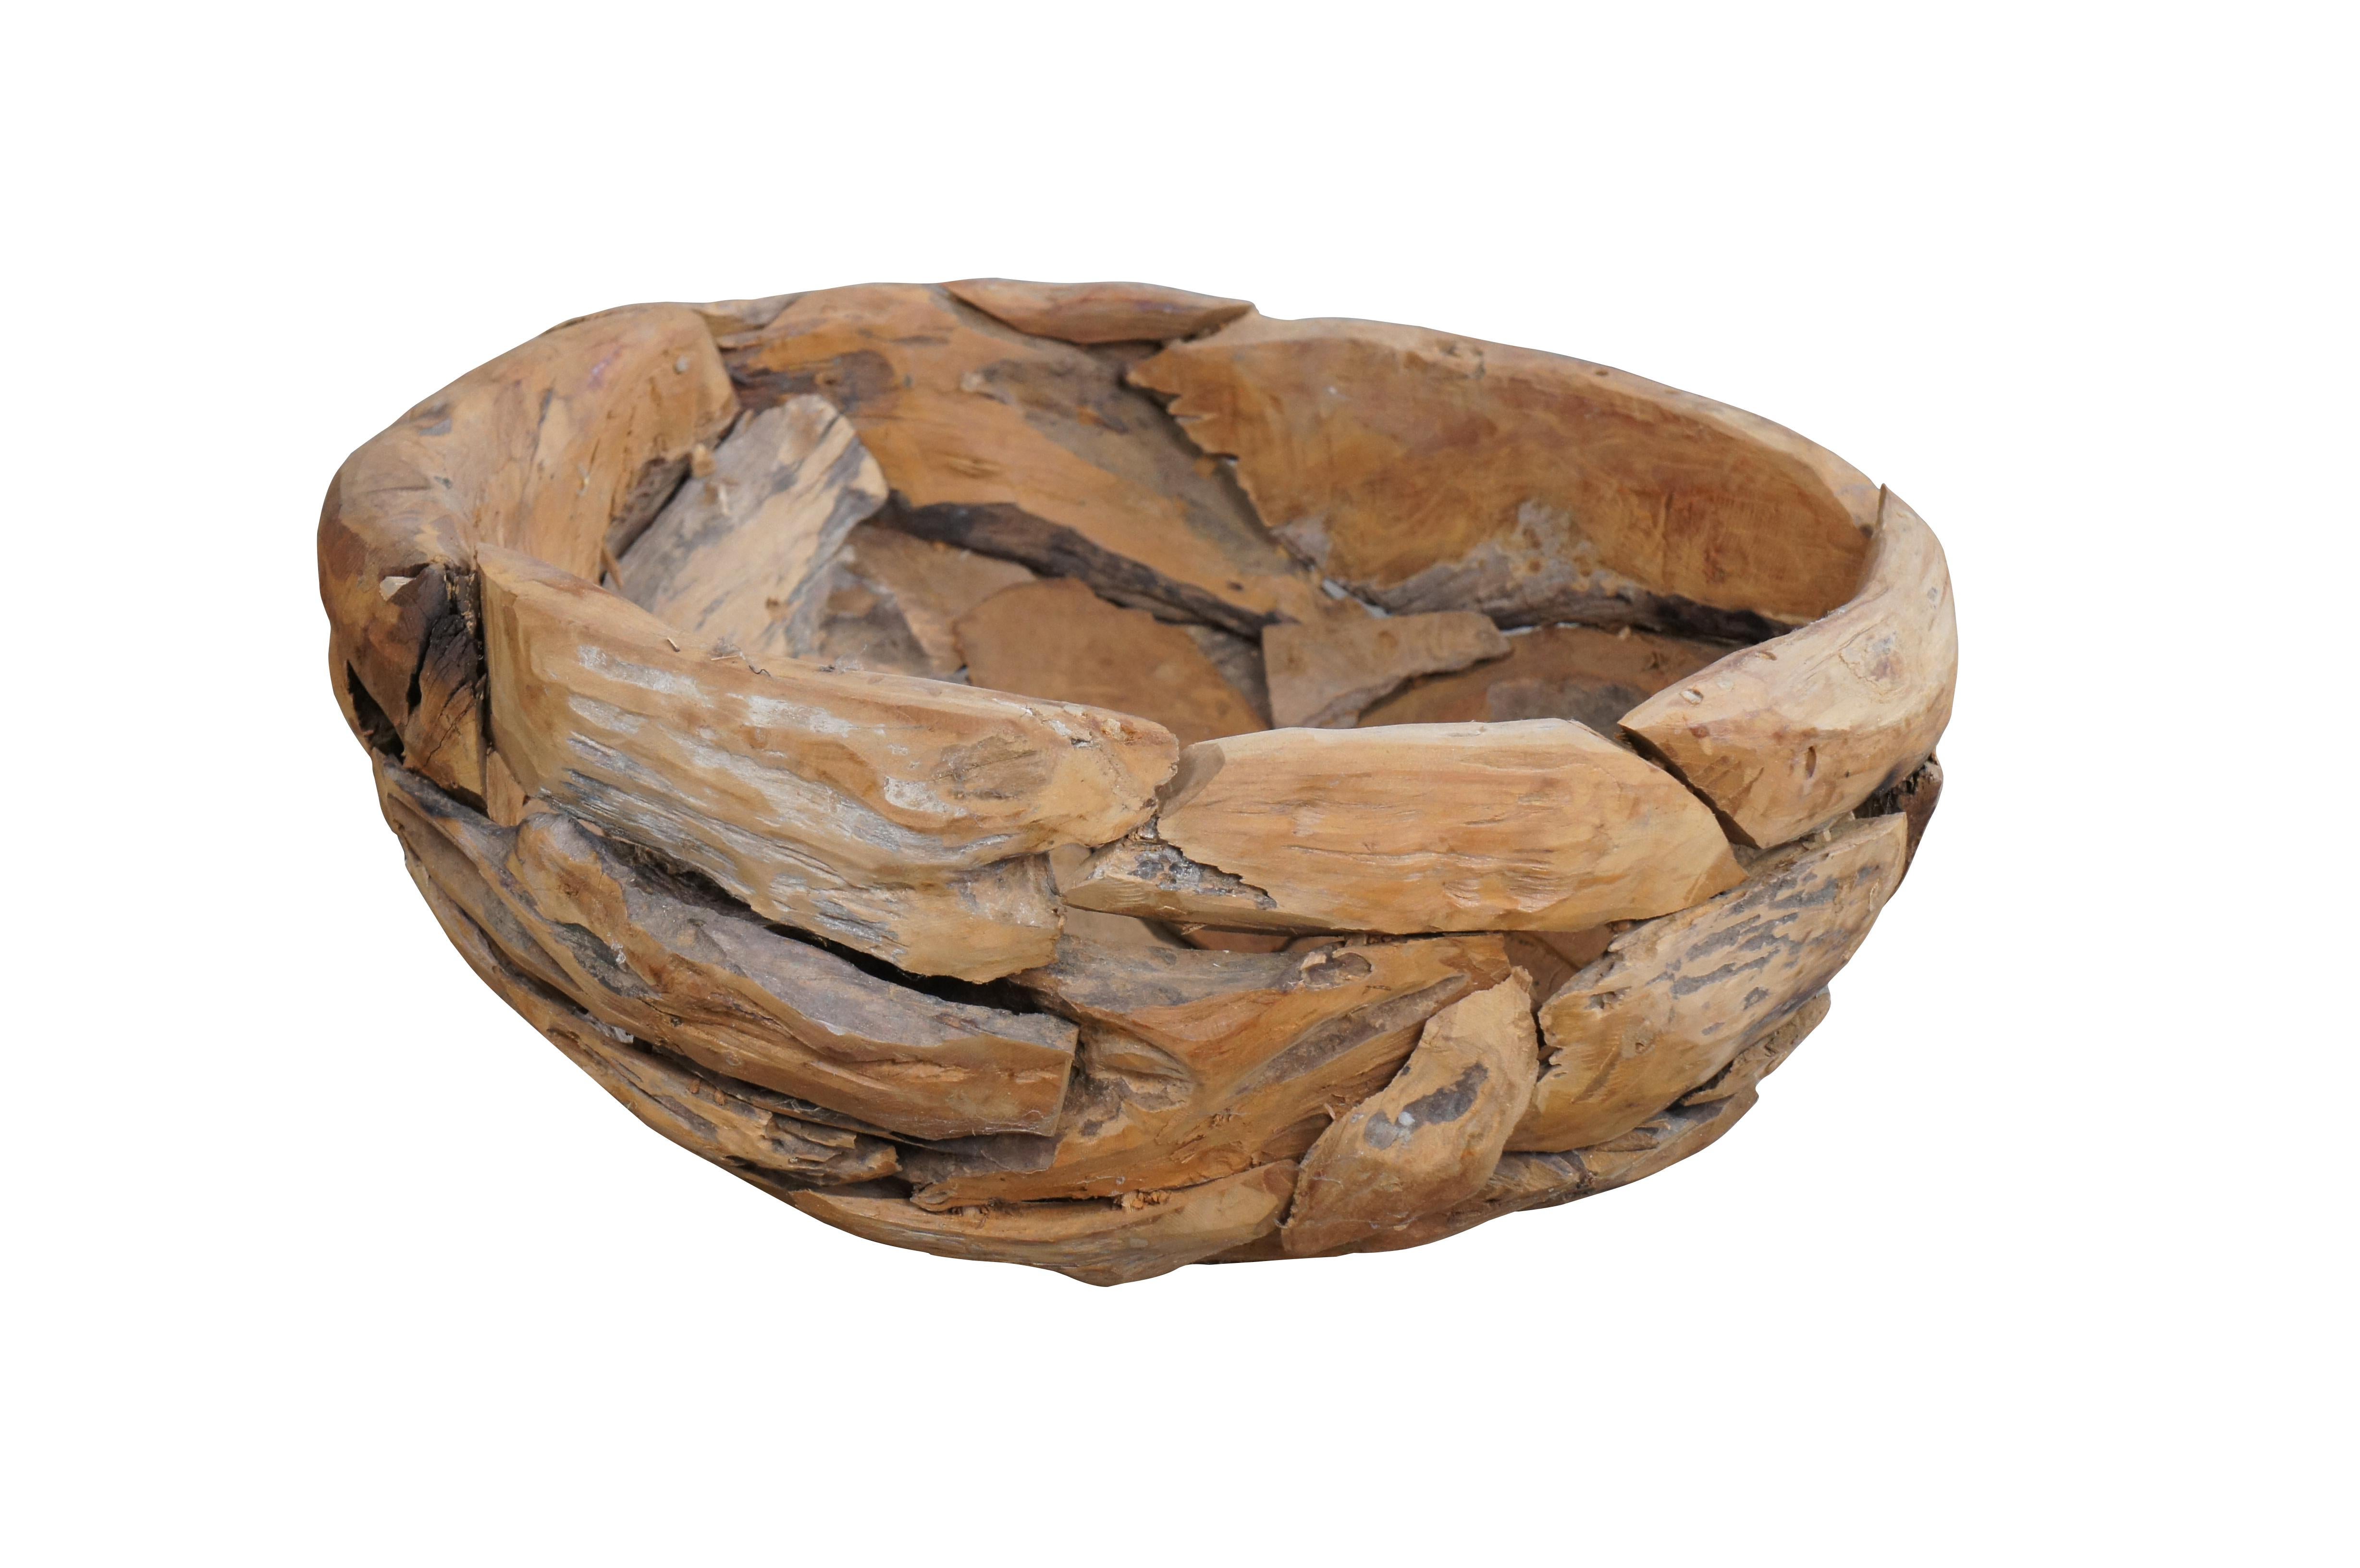 Reclaimed Teak wood bowl or planter. Pieced together from driftwood with a beautiful shape and form.

Dimensions:
24